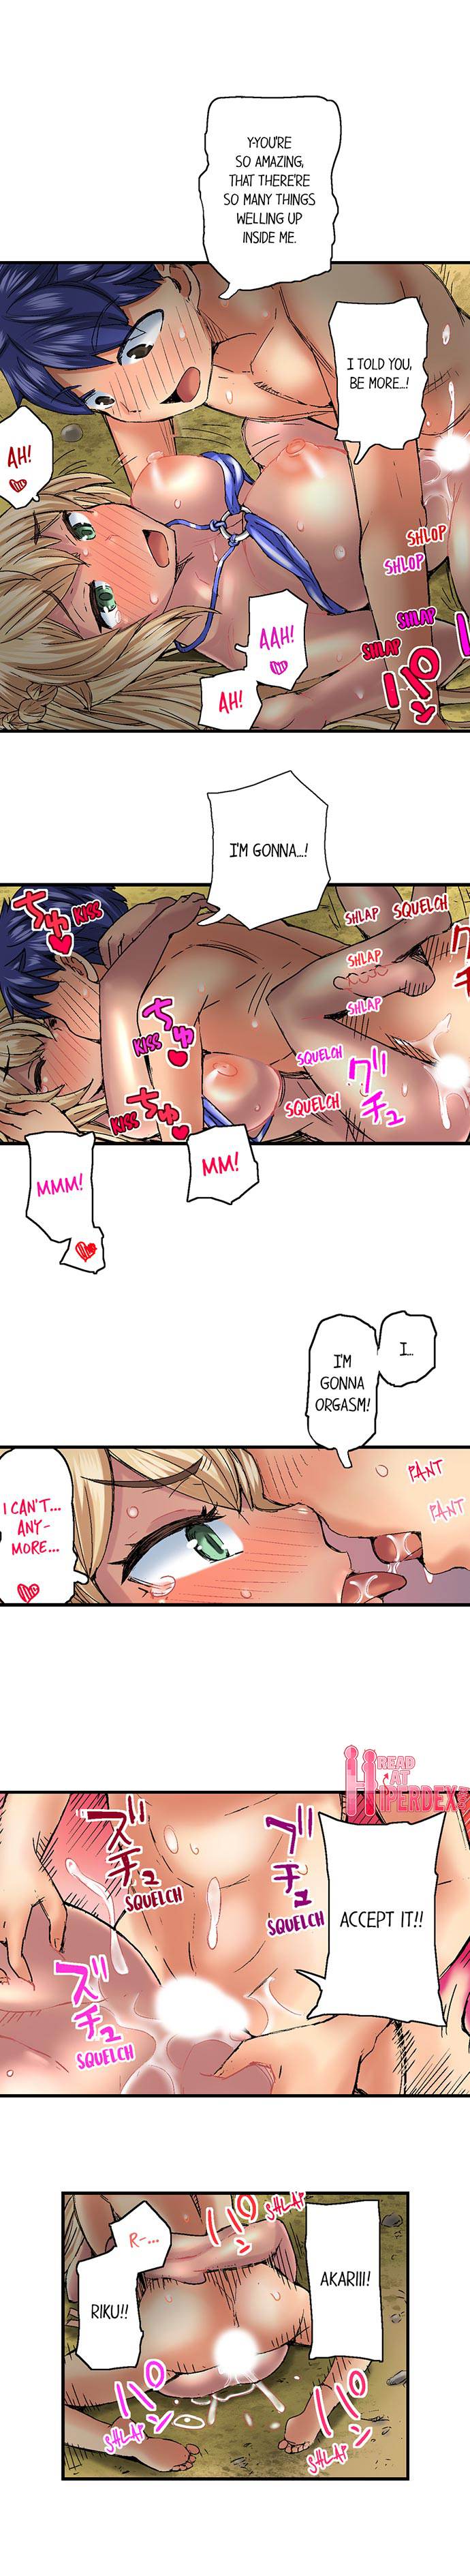 Taking a Hot Tanned Chick’s Virginity - Chapter 12 Page 7